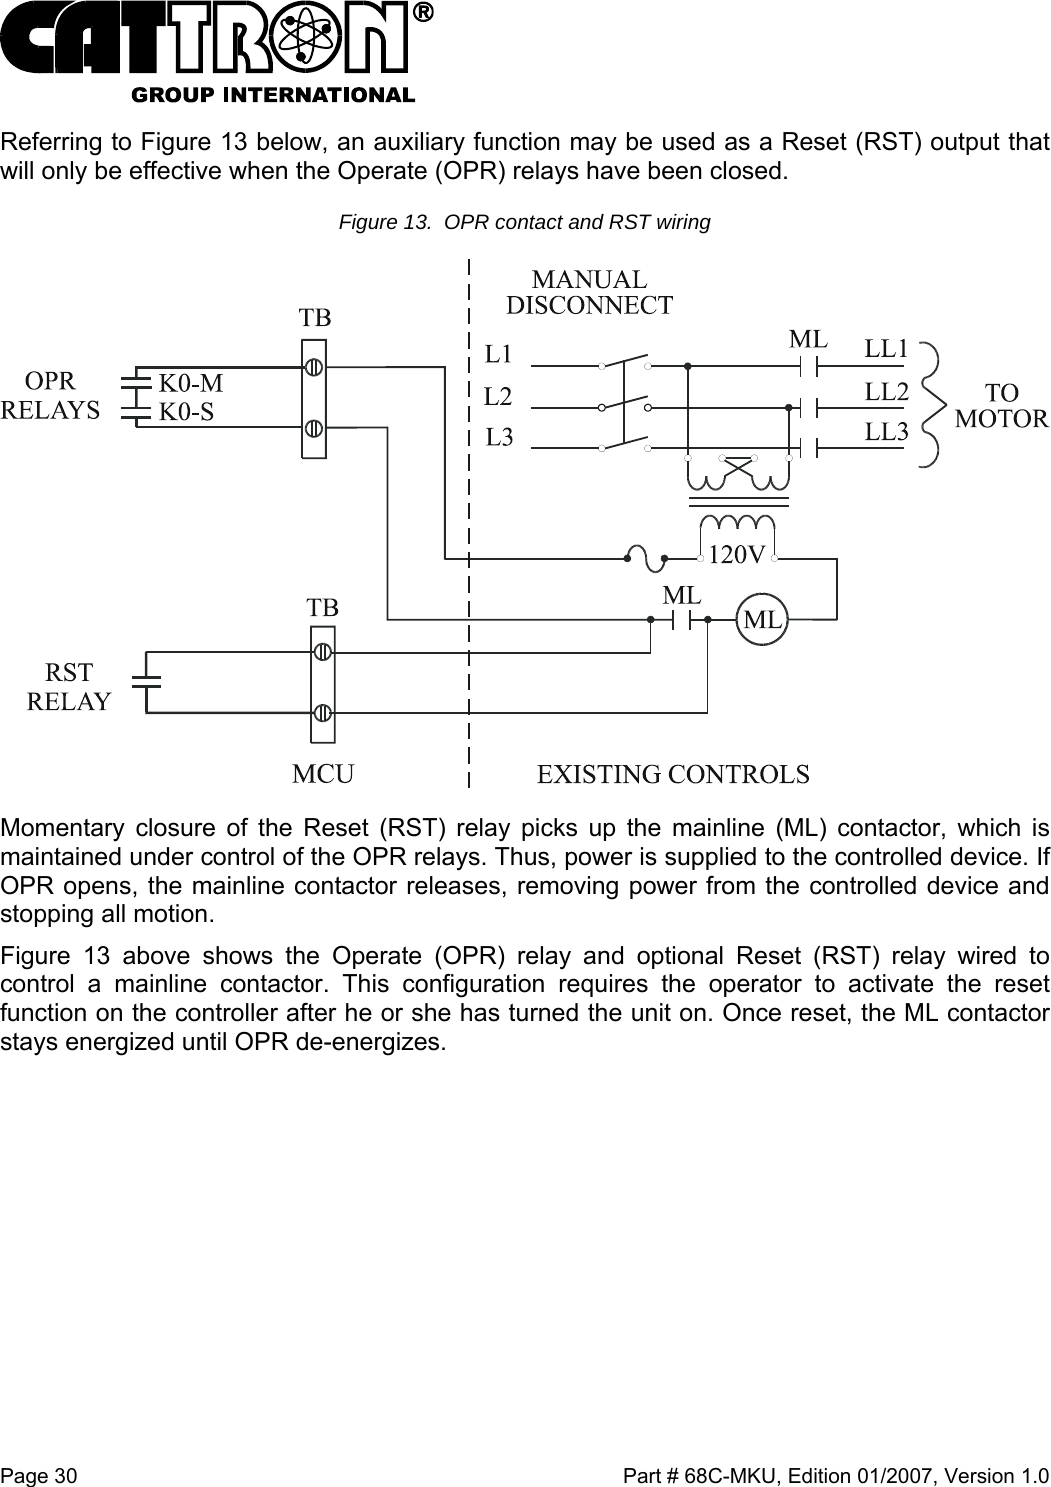  Page 30    Part # 68C-MKU, Edition 01/2007, Version 1.0 Referring to Figure 13 below, an auxiliary function may be used as a Reset (RST) output that will only be effective when the Operate (OPR) relays have been closed. Figure 13.  OPR contact and RST wiring    Momentary closure of the Reset (RST) relay picks up the mainline (ML) contactor, which is maintained under control of the OPR relays. Thus, power is supplied to the controlled device. If OPR opens, the mainline contactor releases, removing power from the controlled device and stopping all motion. Figure 13 above shows the Operate (OPR) relay and optional Reset (RST) relay wired to control a mainline contactor. This configuration requires the operator to activate the reset function on the controller after he or she has turned the unit on. Once reset, the ML contactor stays energized until OPR de-energizes.    